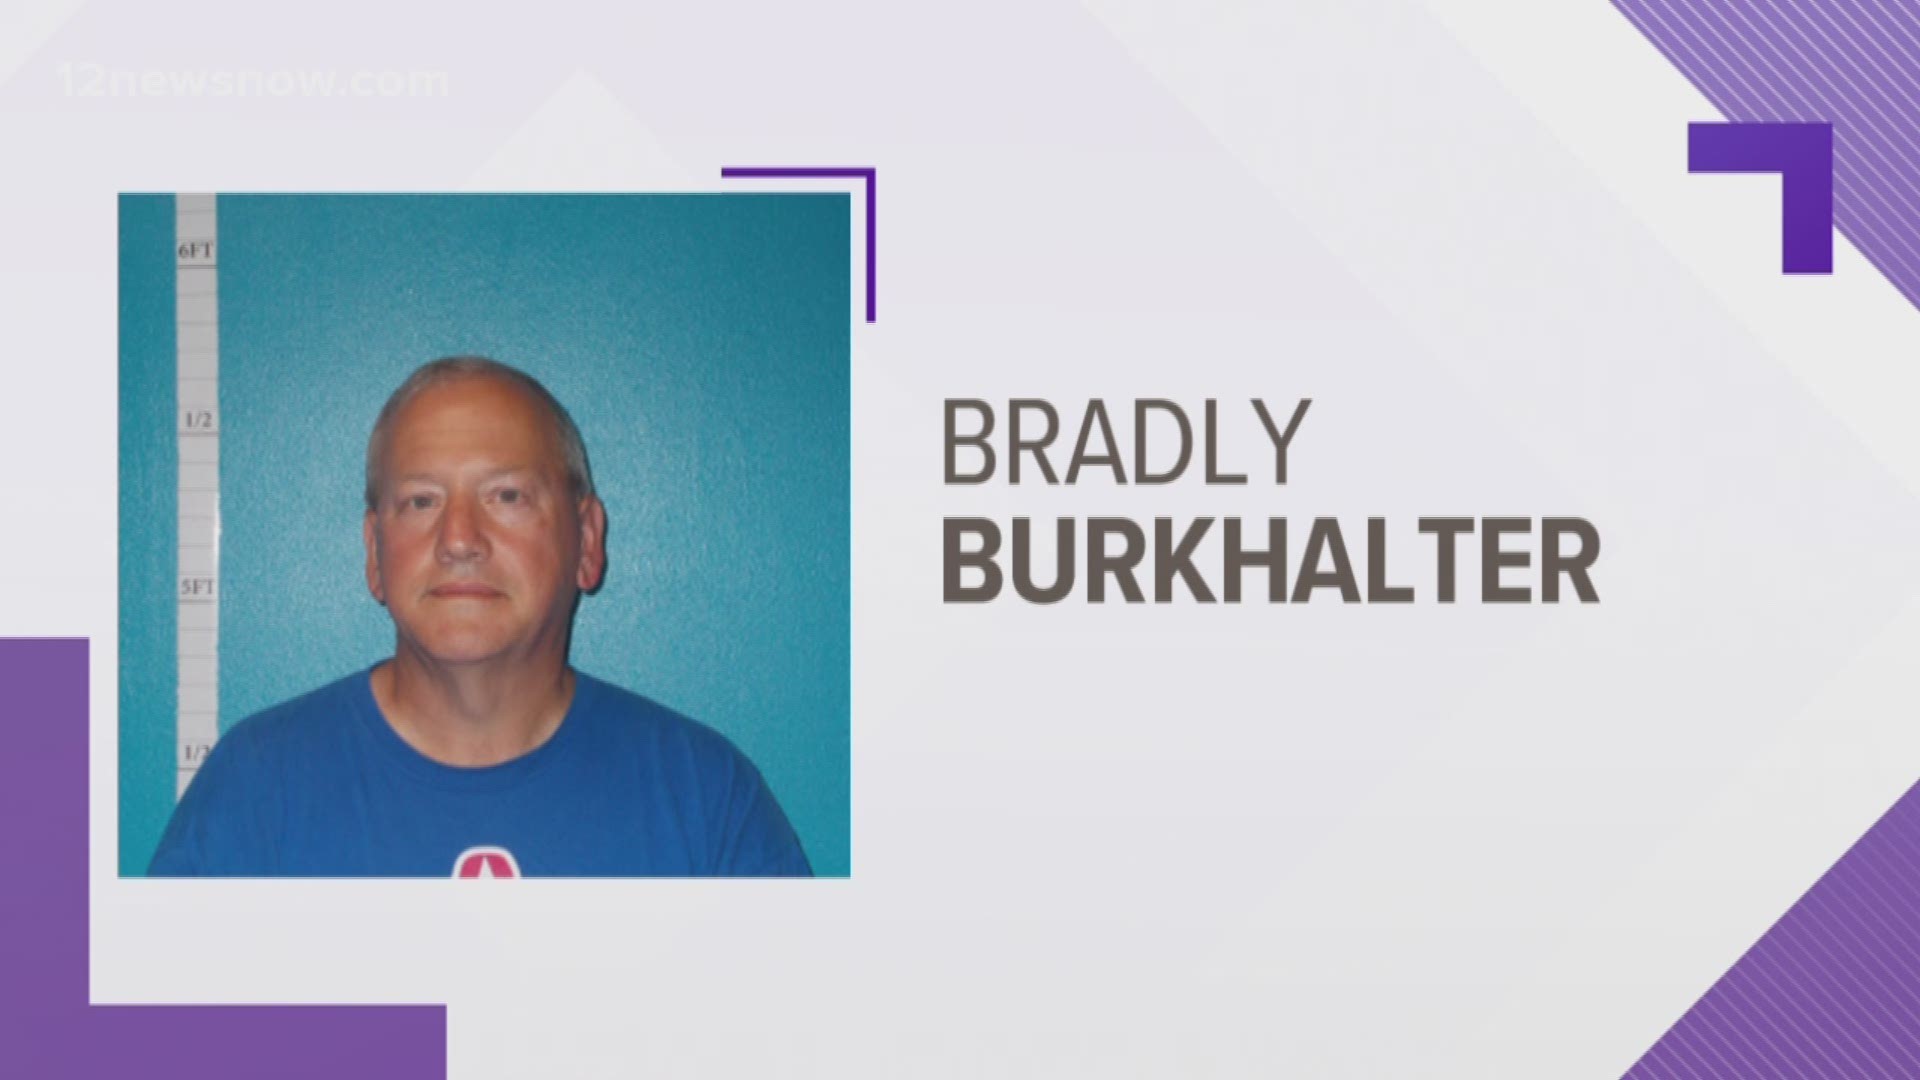 Bradly Burkhalter allegedly threw kittens out of the car window on Wheeler Road.